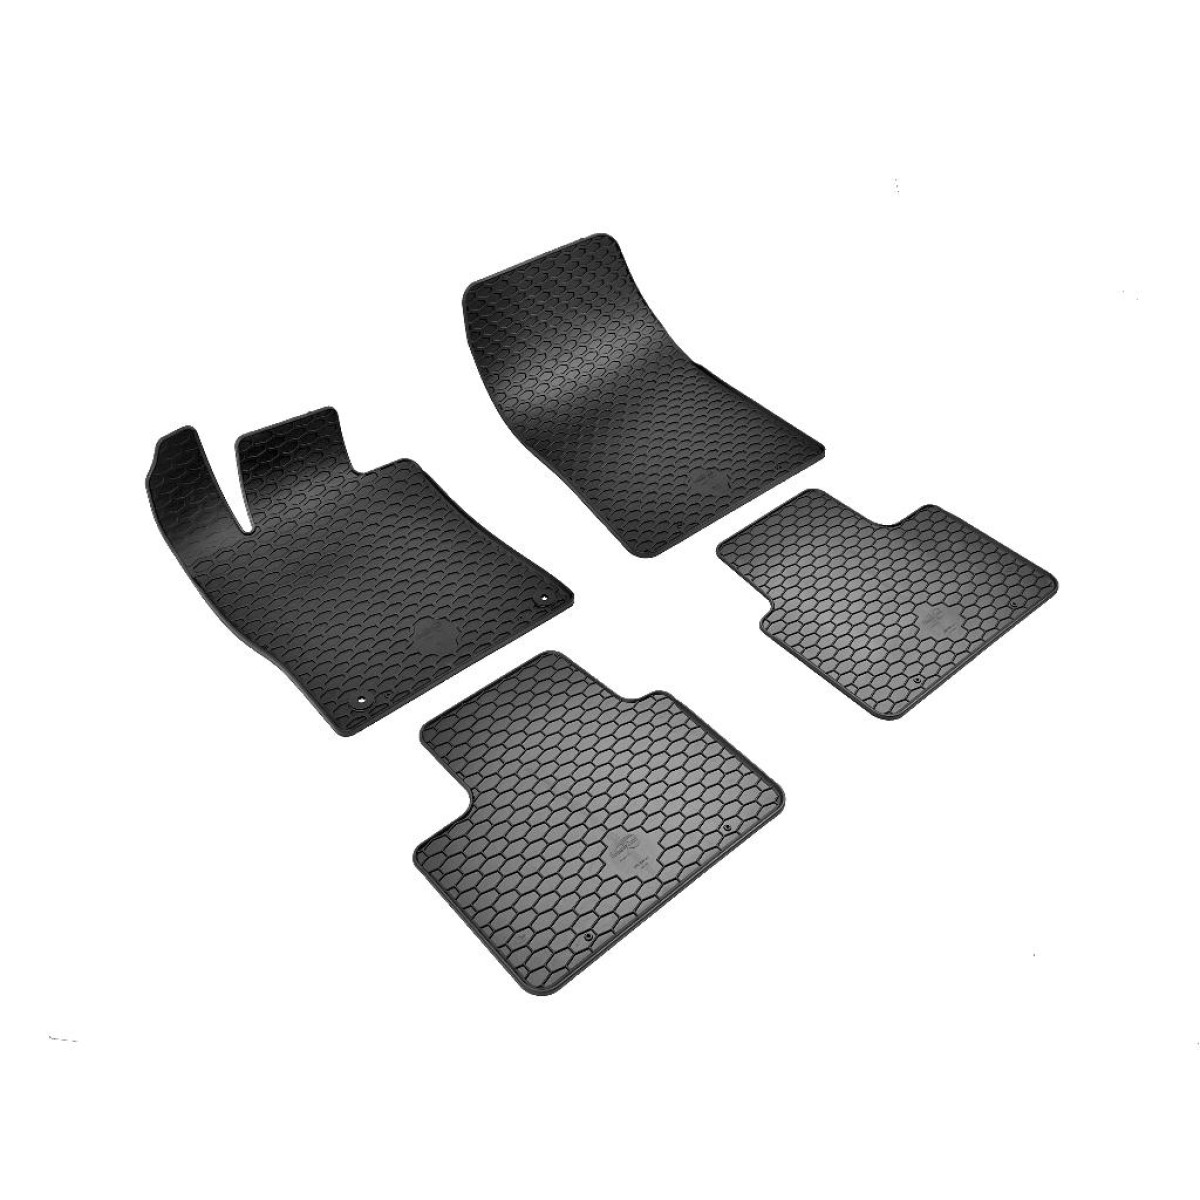 Rubber mats Peugeot 308 SW (from 2021) / also Hybrid, 4 pcs/ 223037 / black